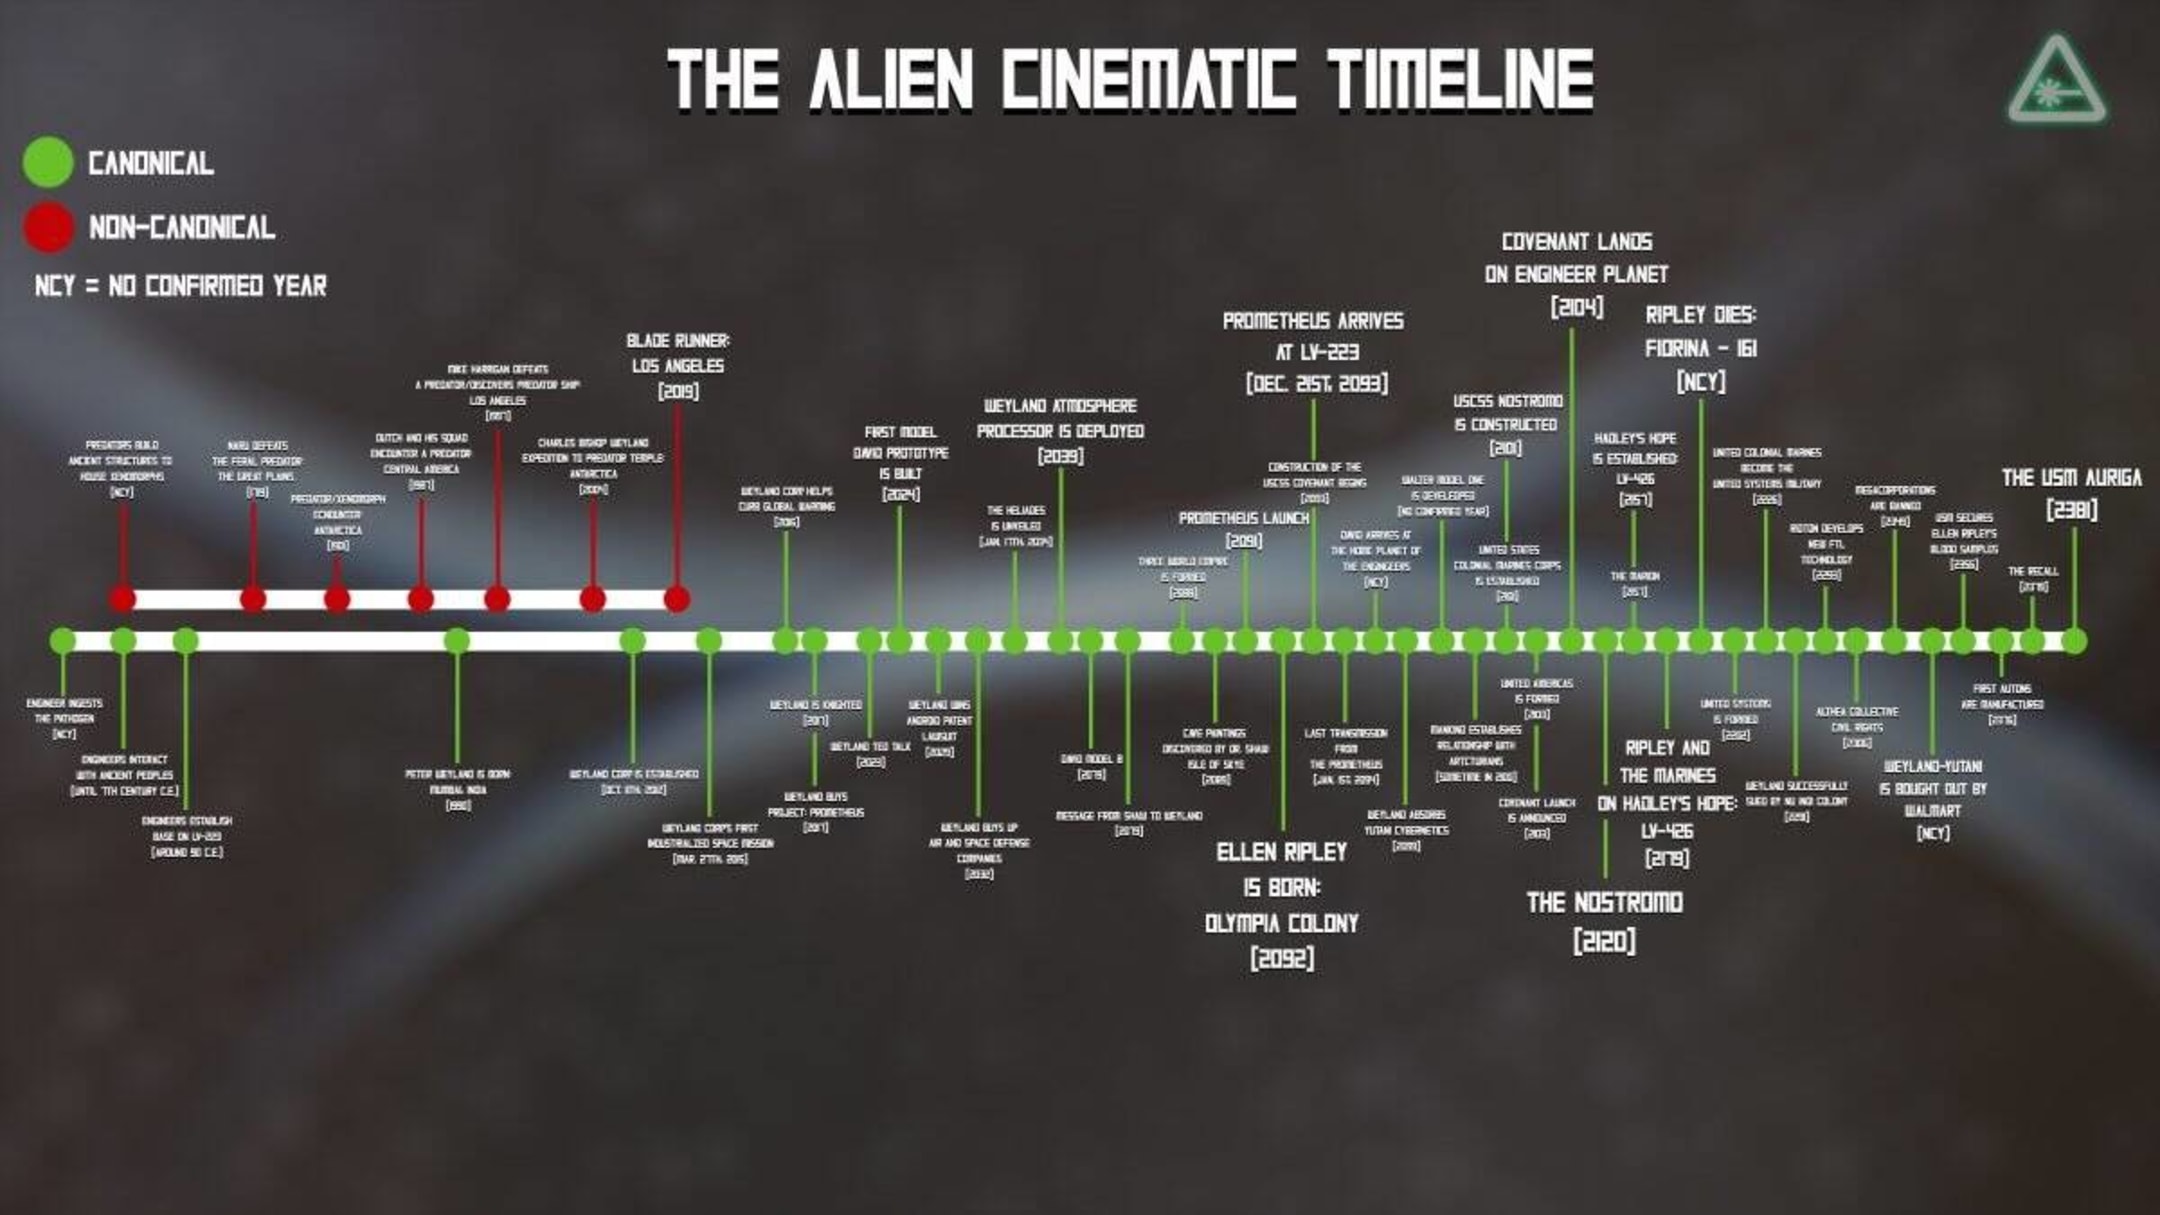 Is there an established chronological timeline for the Alien